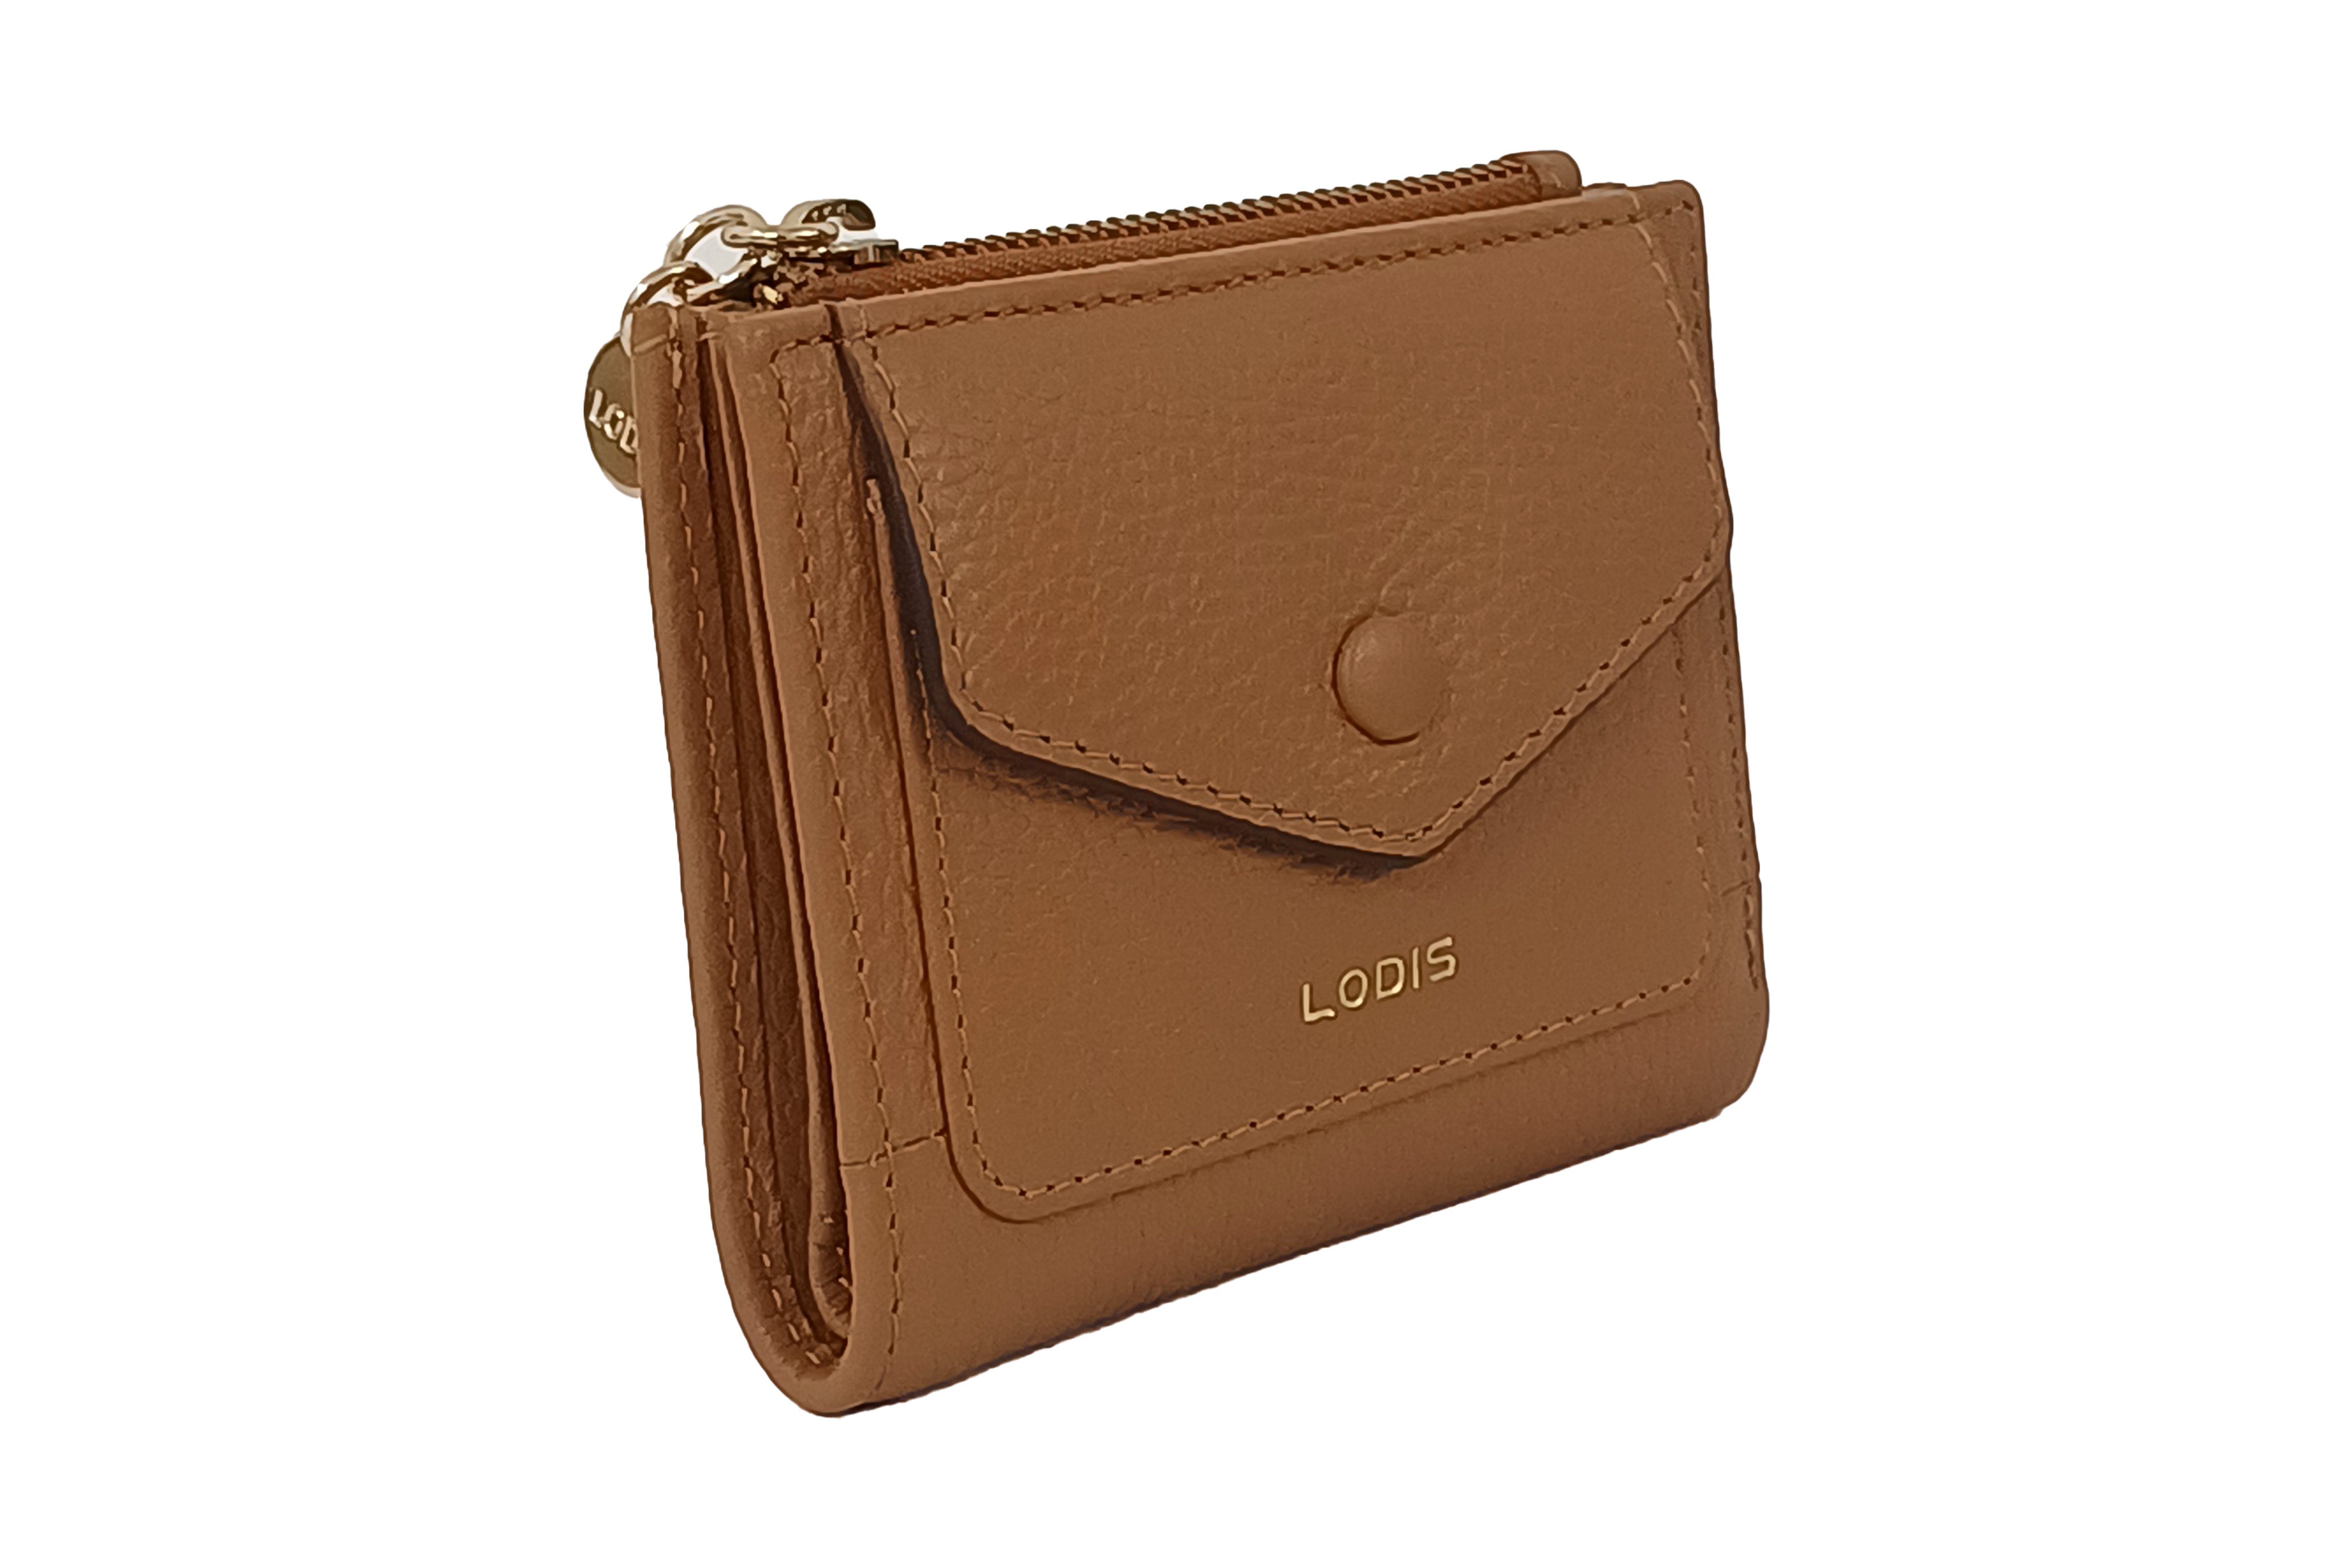 STACEY COMPACT WALLET